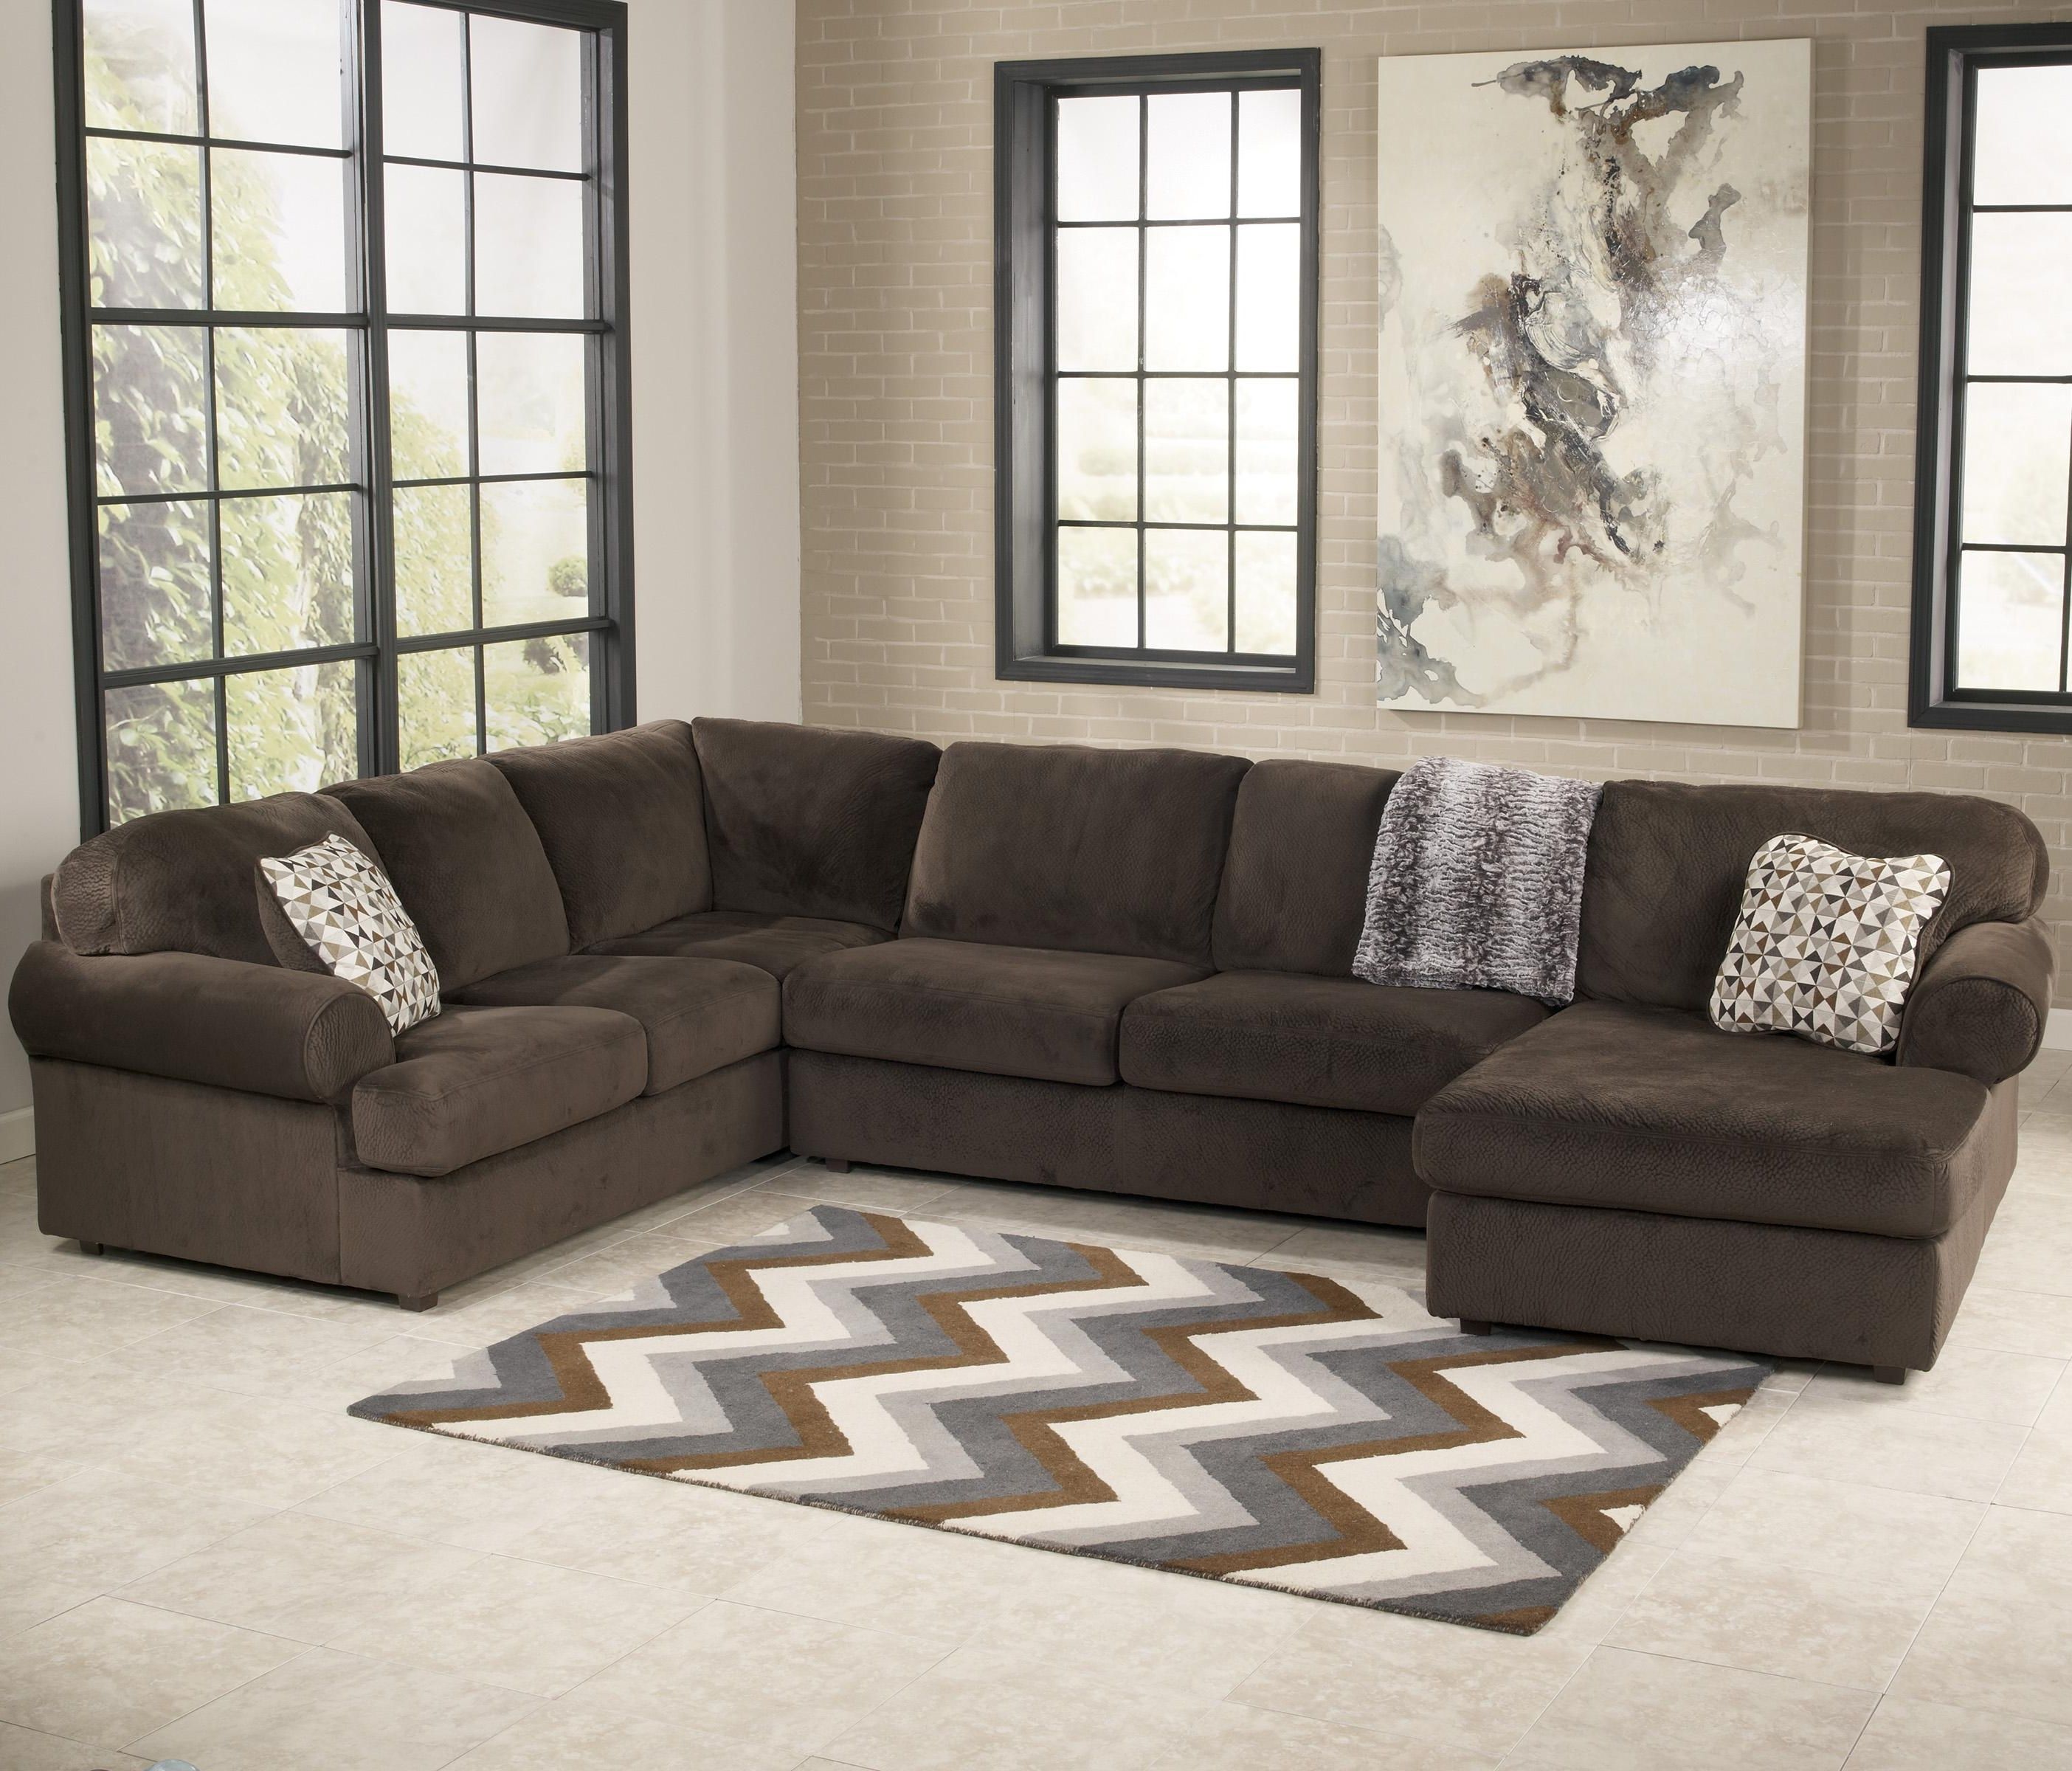 Sectional Sofas At Chicago Intended For Widely Used Sectional Couches Contemporary Sofas Chicago The Room Place Credit (View 4 of 15)